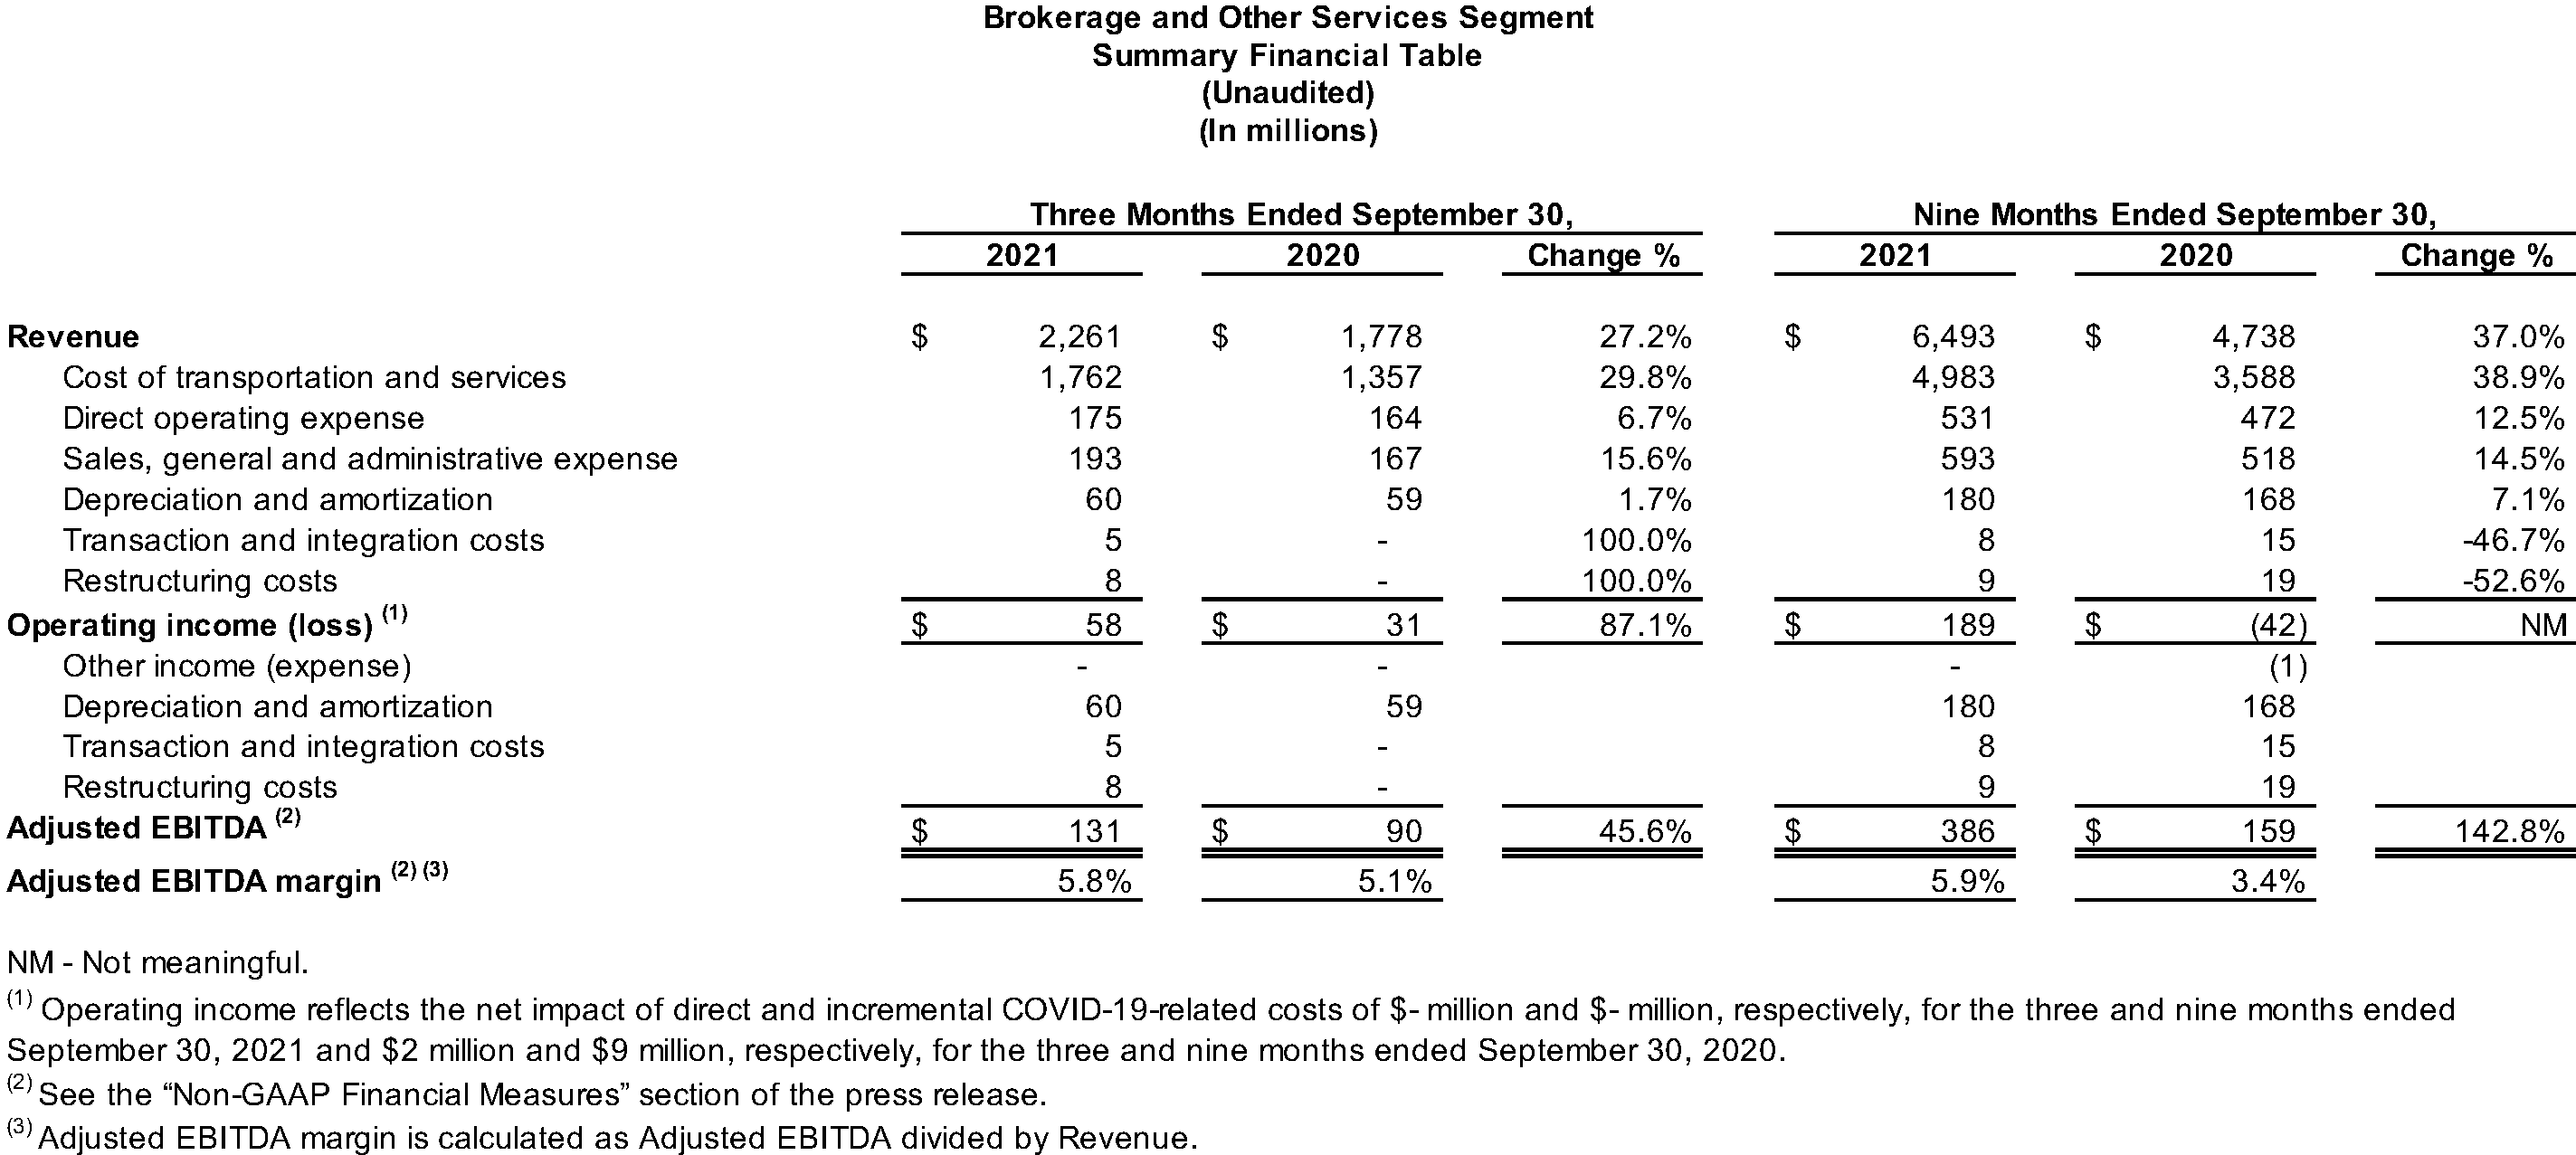 Brokerage and Other Services Segment Summary Financial Table (Unaudited)